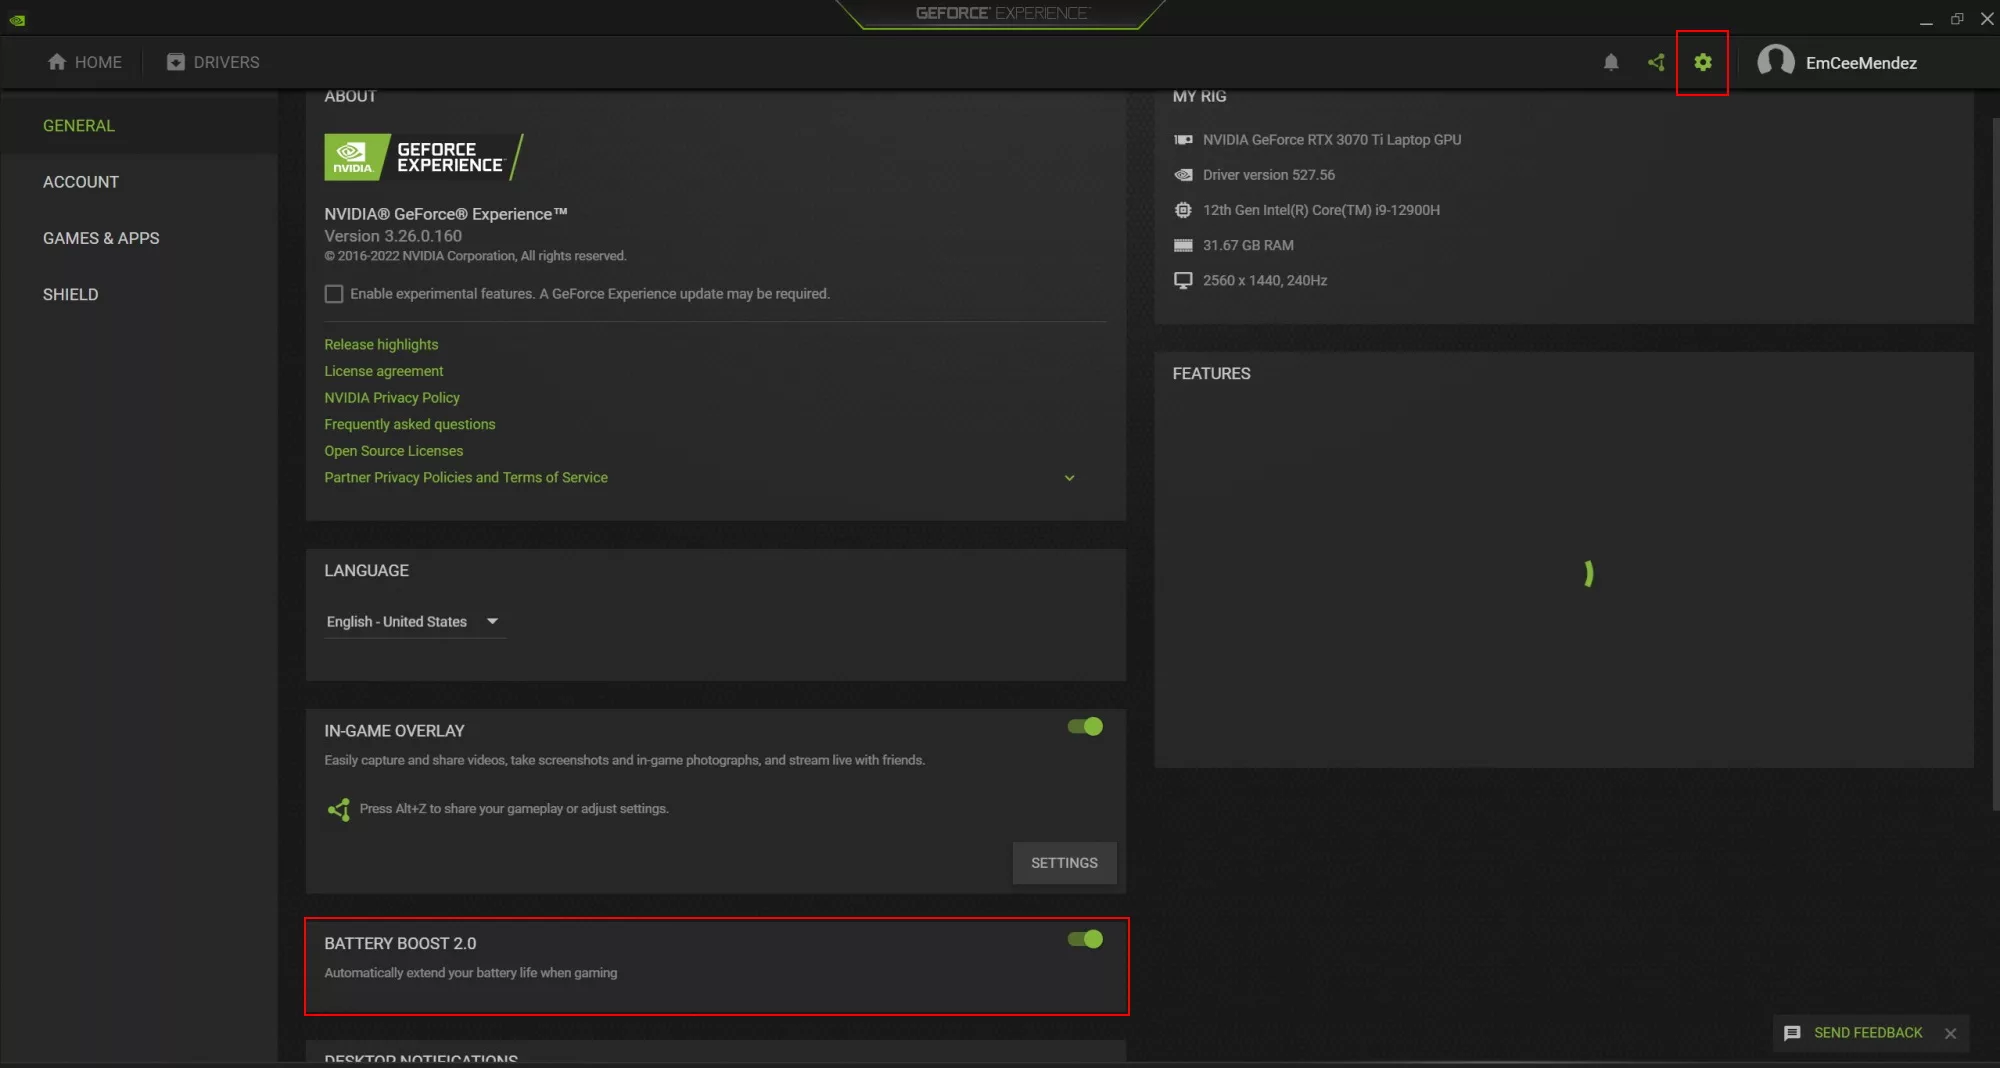 Screenshot of NVIDIA GeForce Experience settings, with emphasis on the location of the BatteryBoost 2.0 toggle.